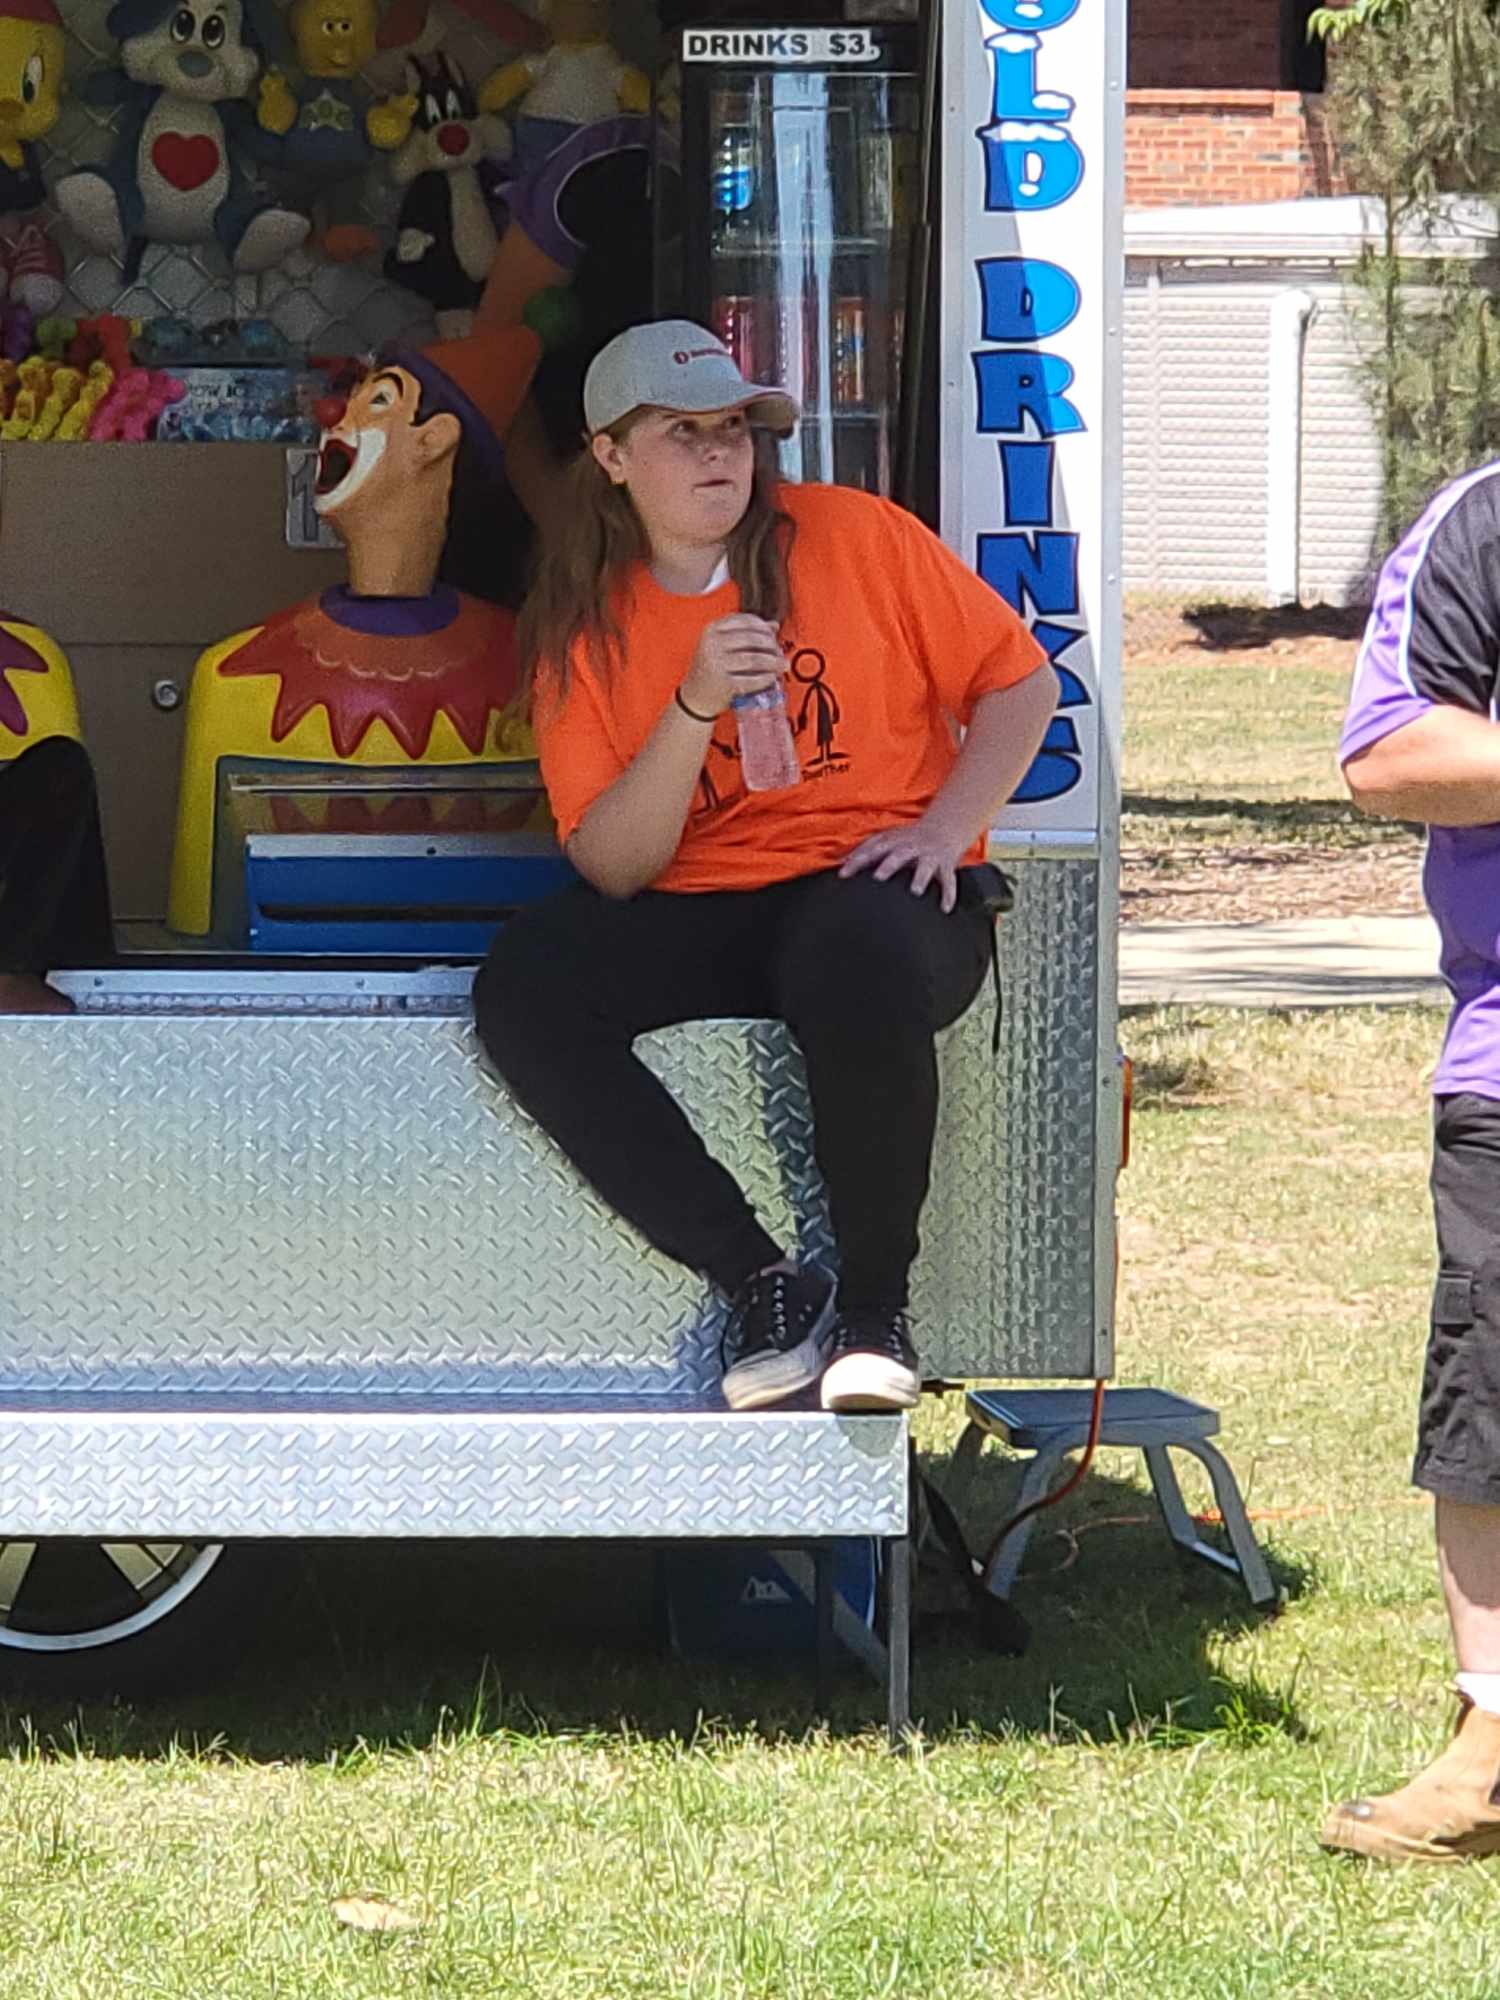 one of our volunteers taking a break at the laughing clowns stand